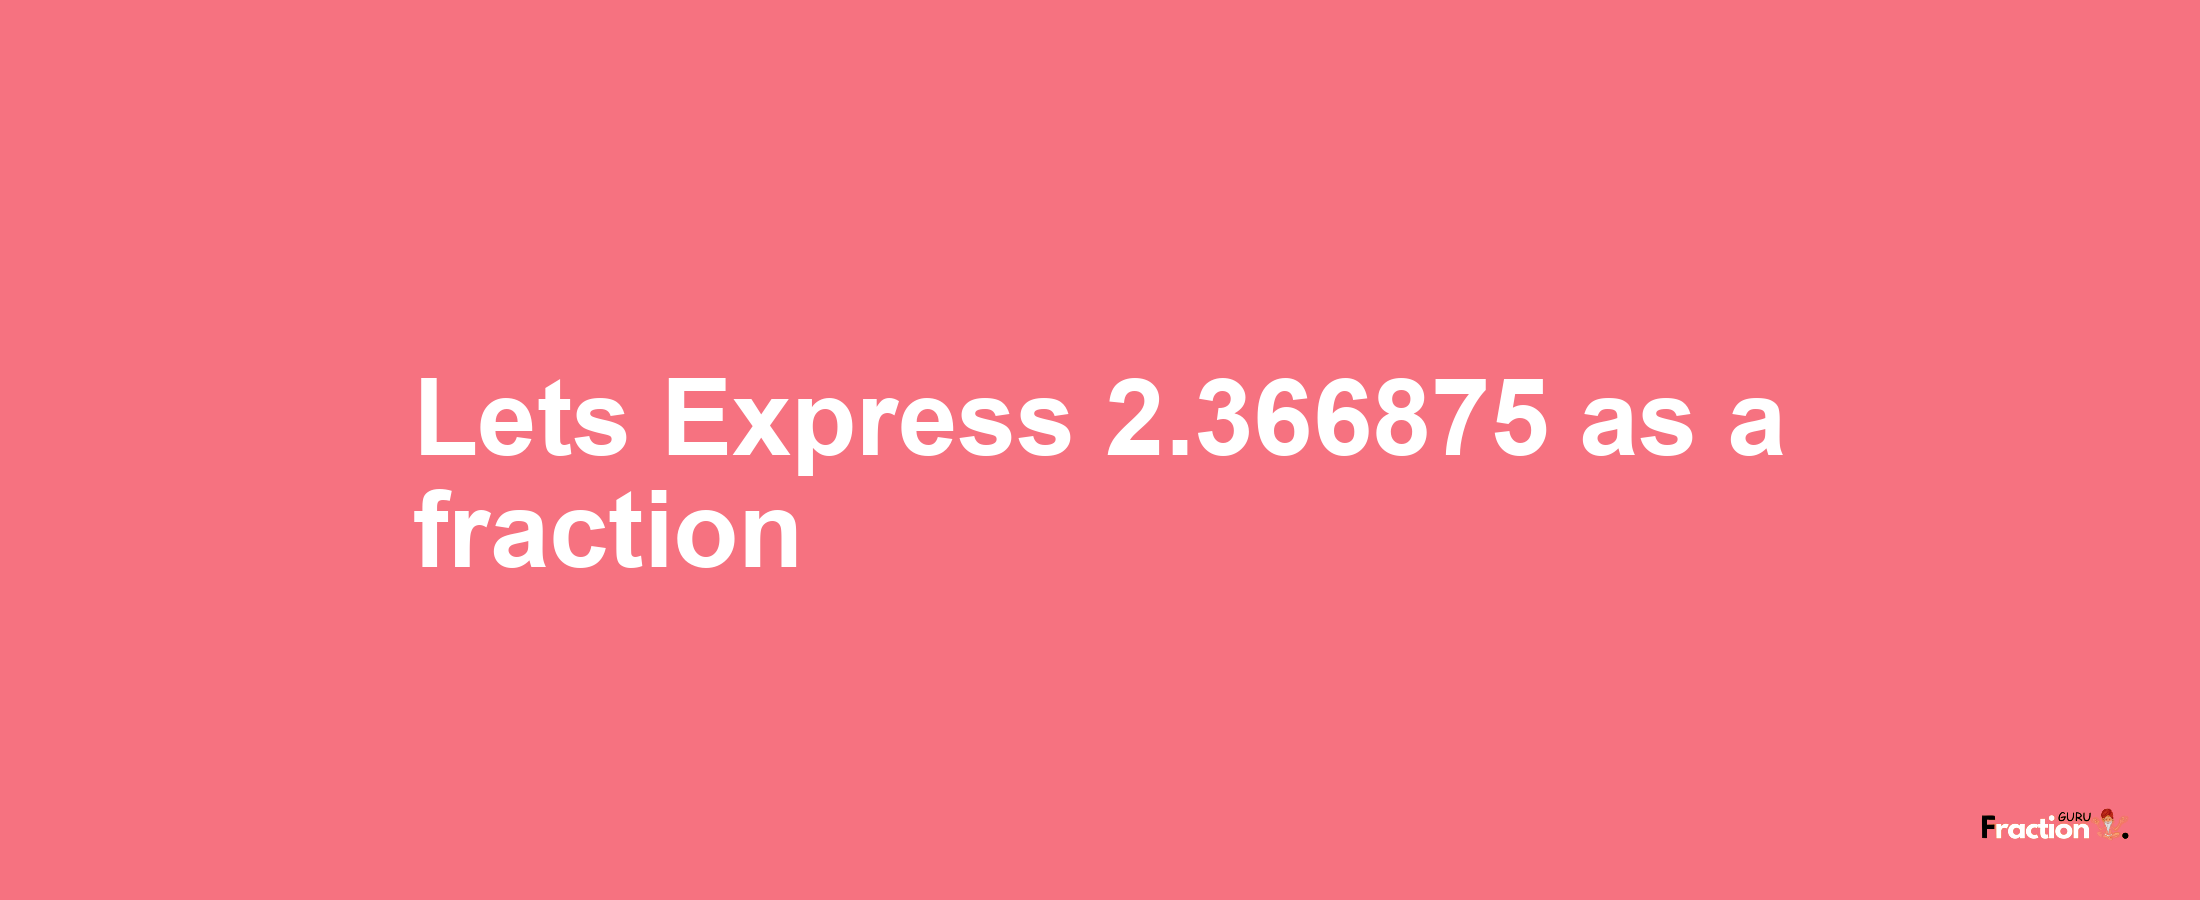 Lets Express 2.366875 as afraction